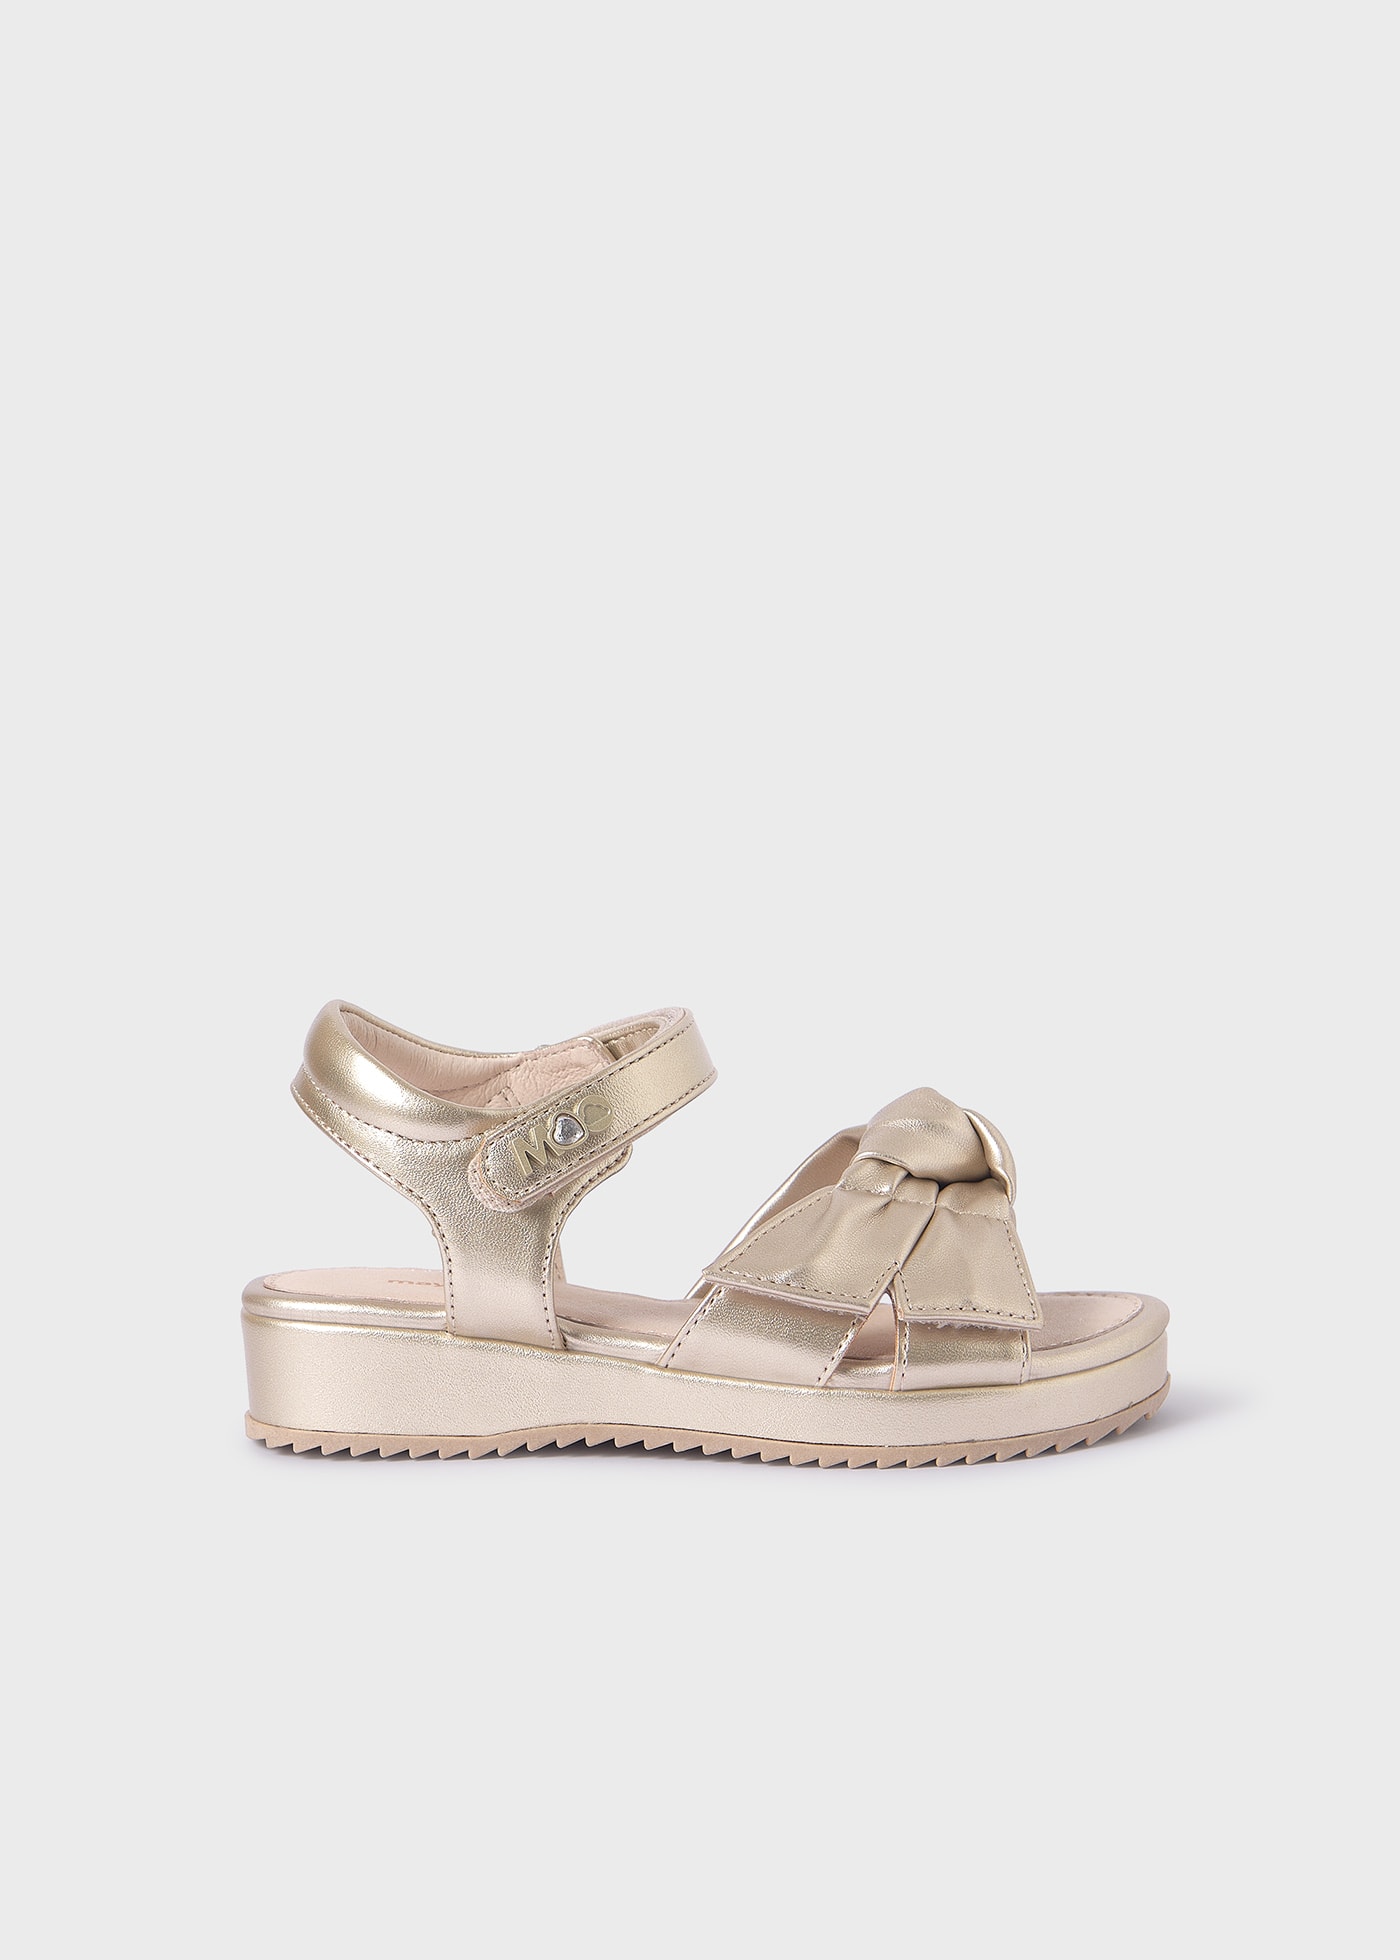 Girls bow sandals sustainable leather